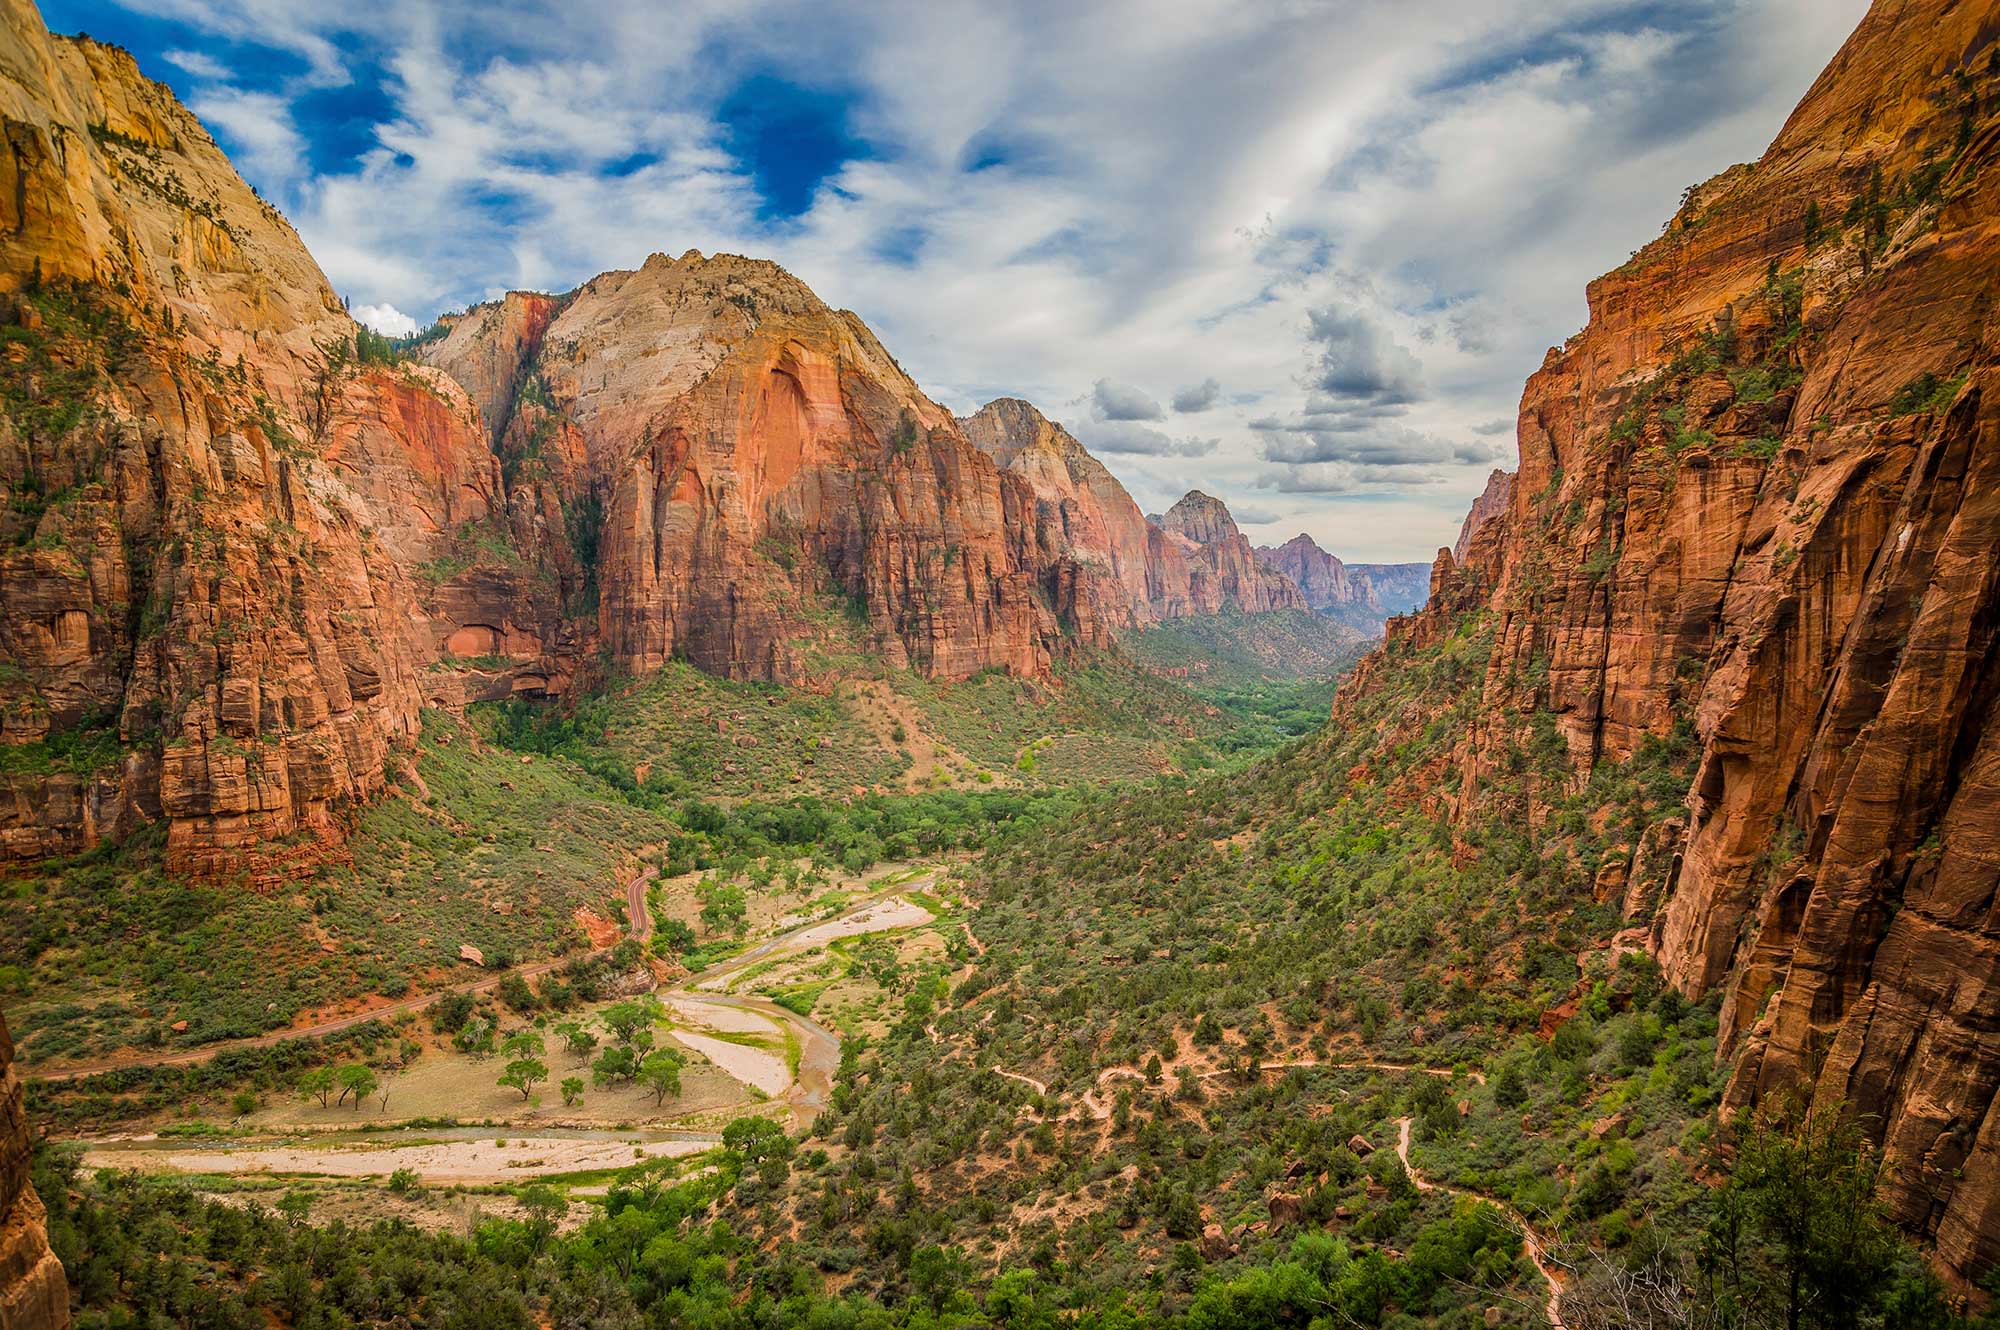 4 Reasons to Dump Disneyland for Zion National Park